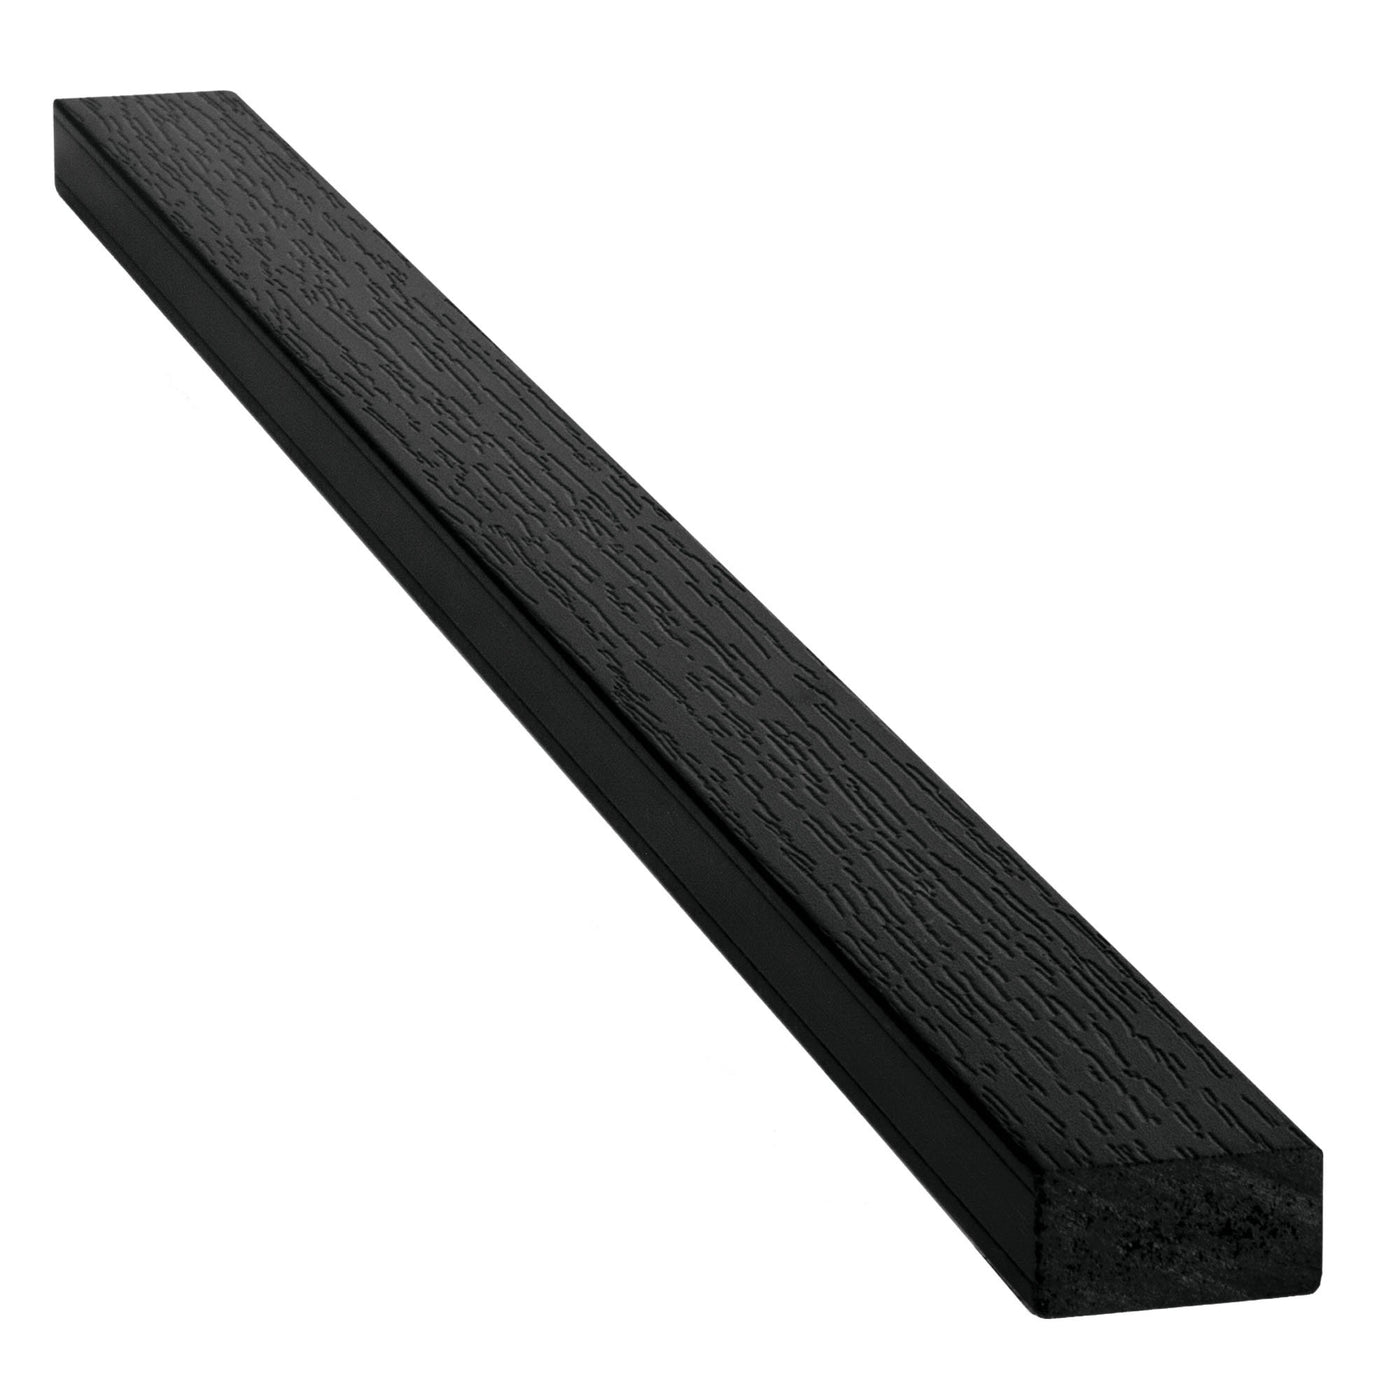 Everwood synthetic wood dimensional lumber {1” x 2” x 6ft} Nominal (recycled resin)- 10 Pieces Highwood USA Black 